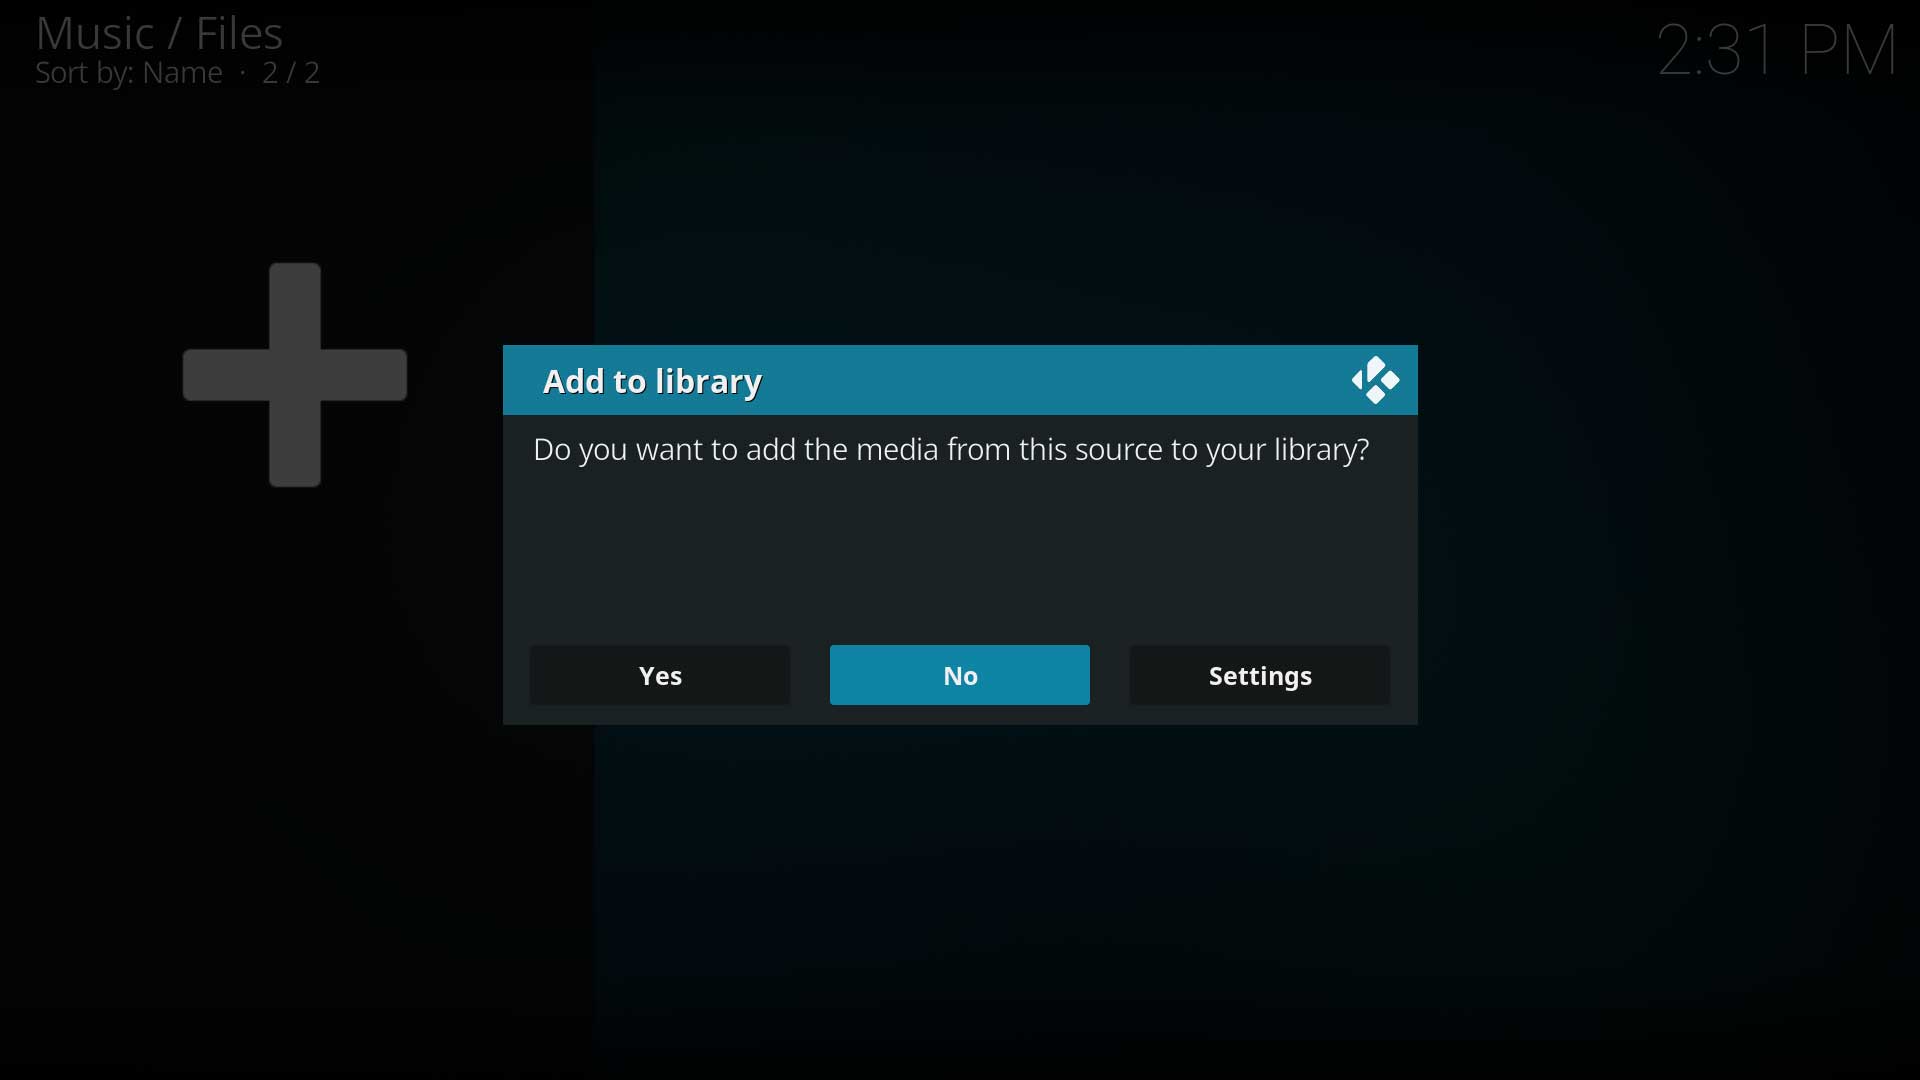 Step 6: You will now be asked if you wish to add your media source to the library. If you do, then select Yes, if you do not, then select No. By selecting No you will only have the option of accessing your media though the Music file browser